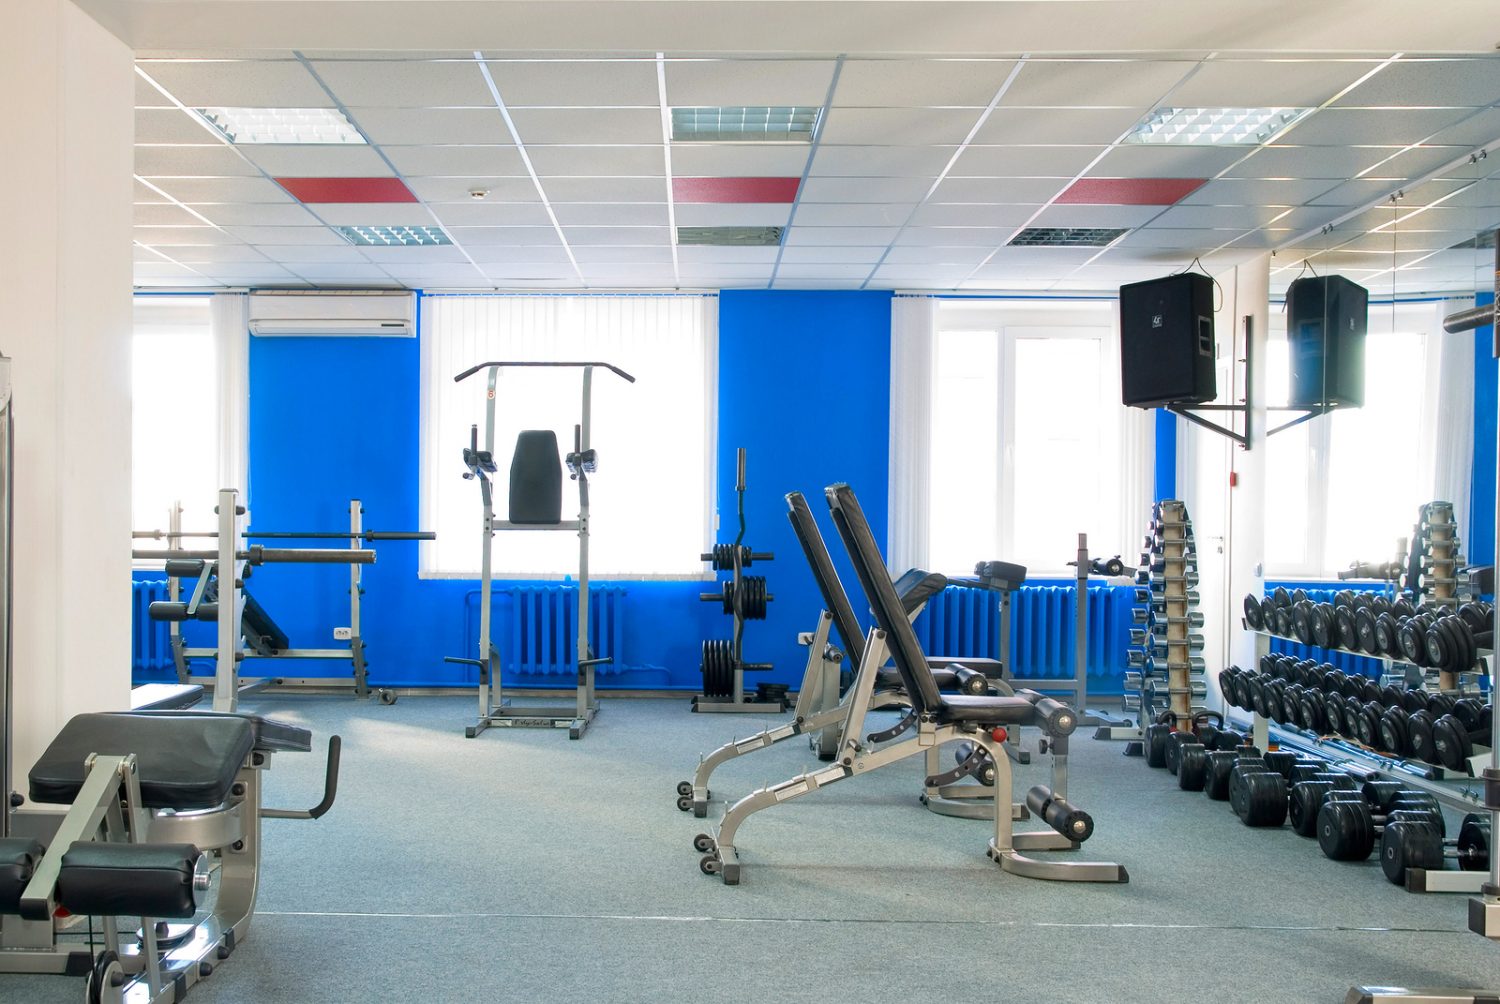 Room with gym equipment in the sport club